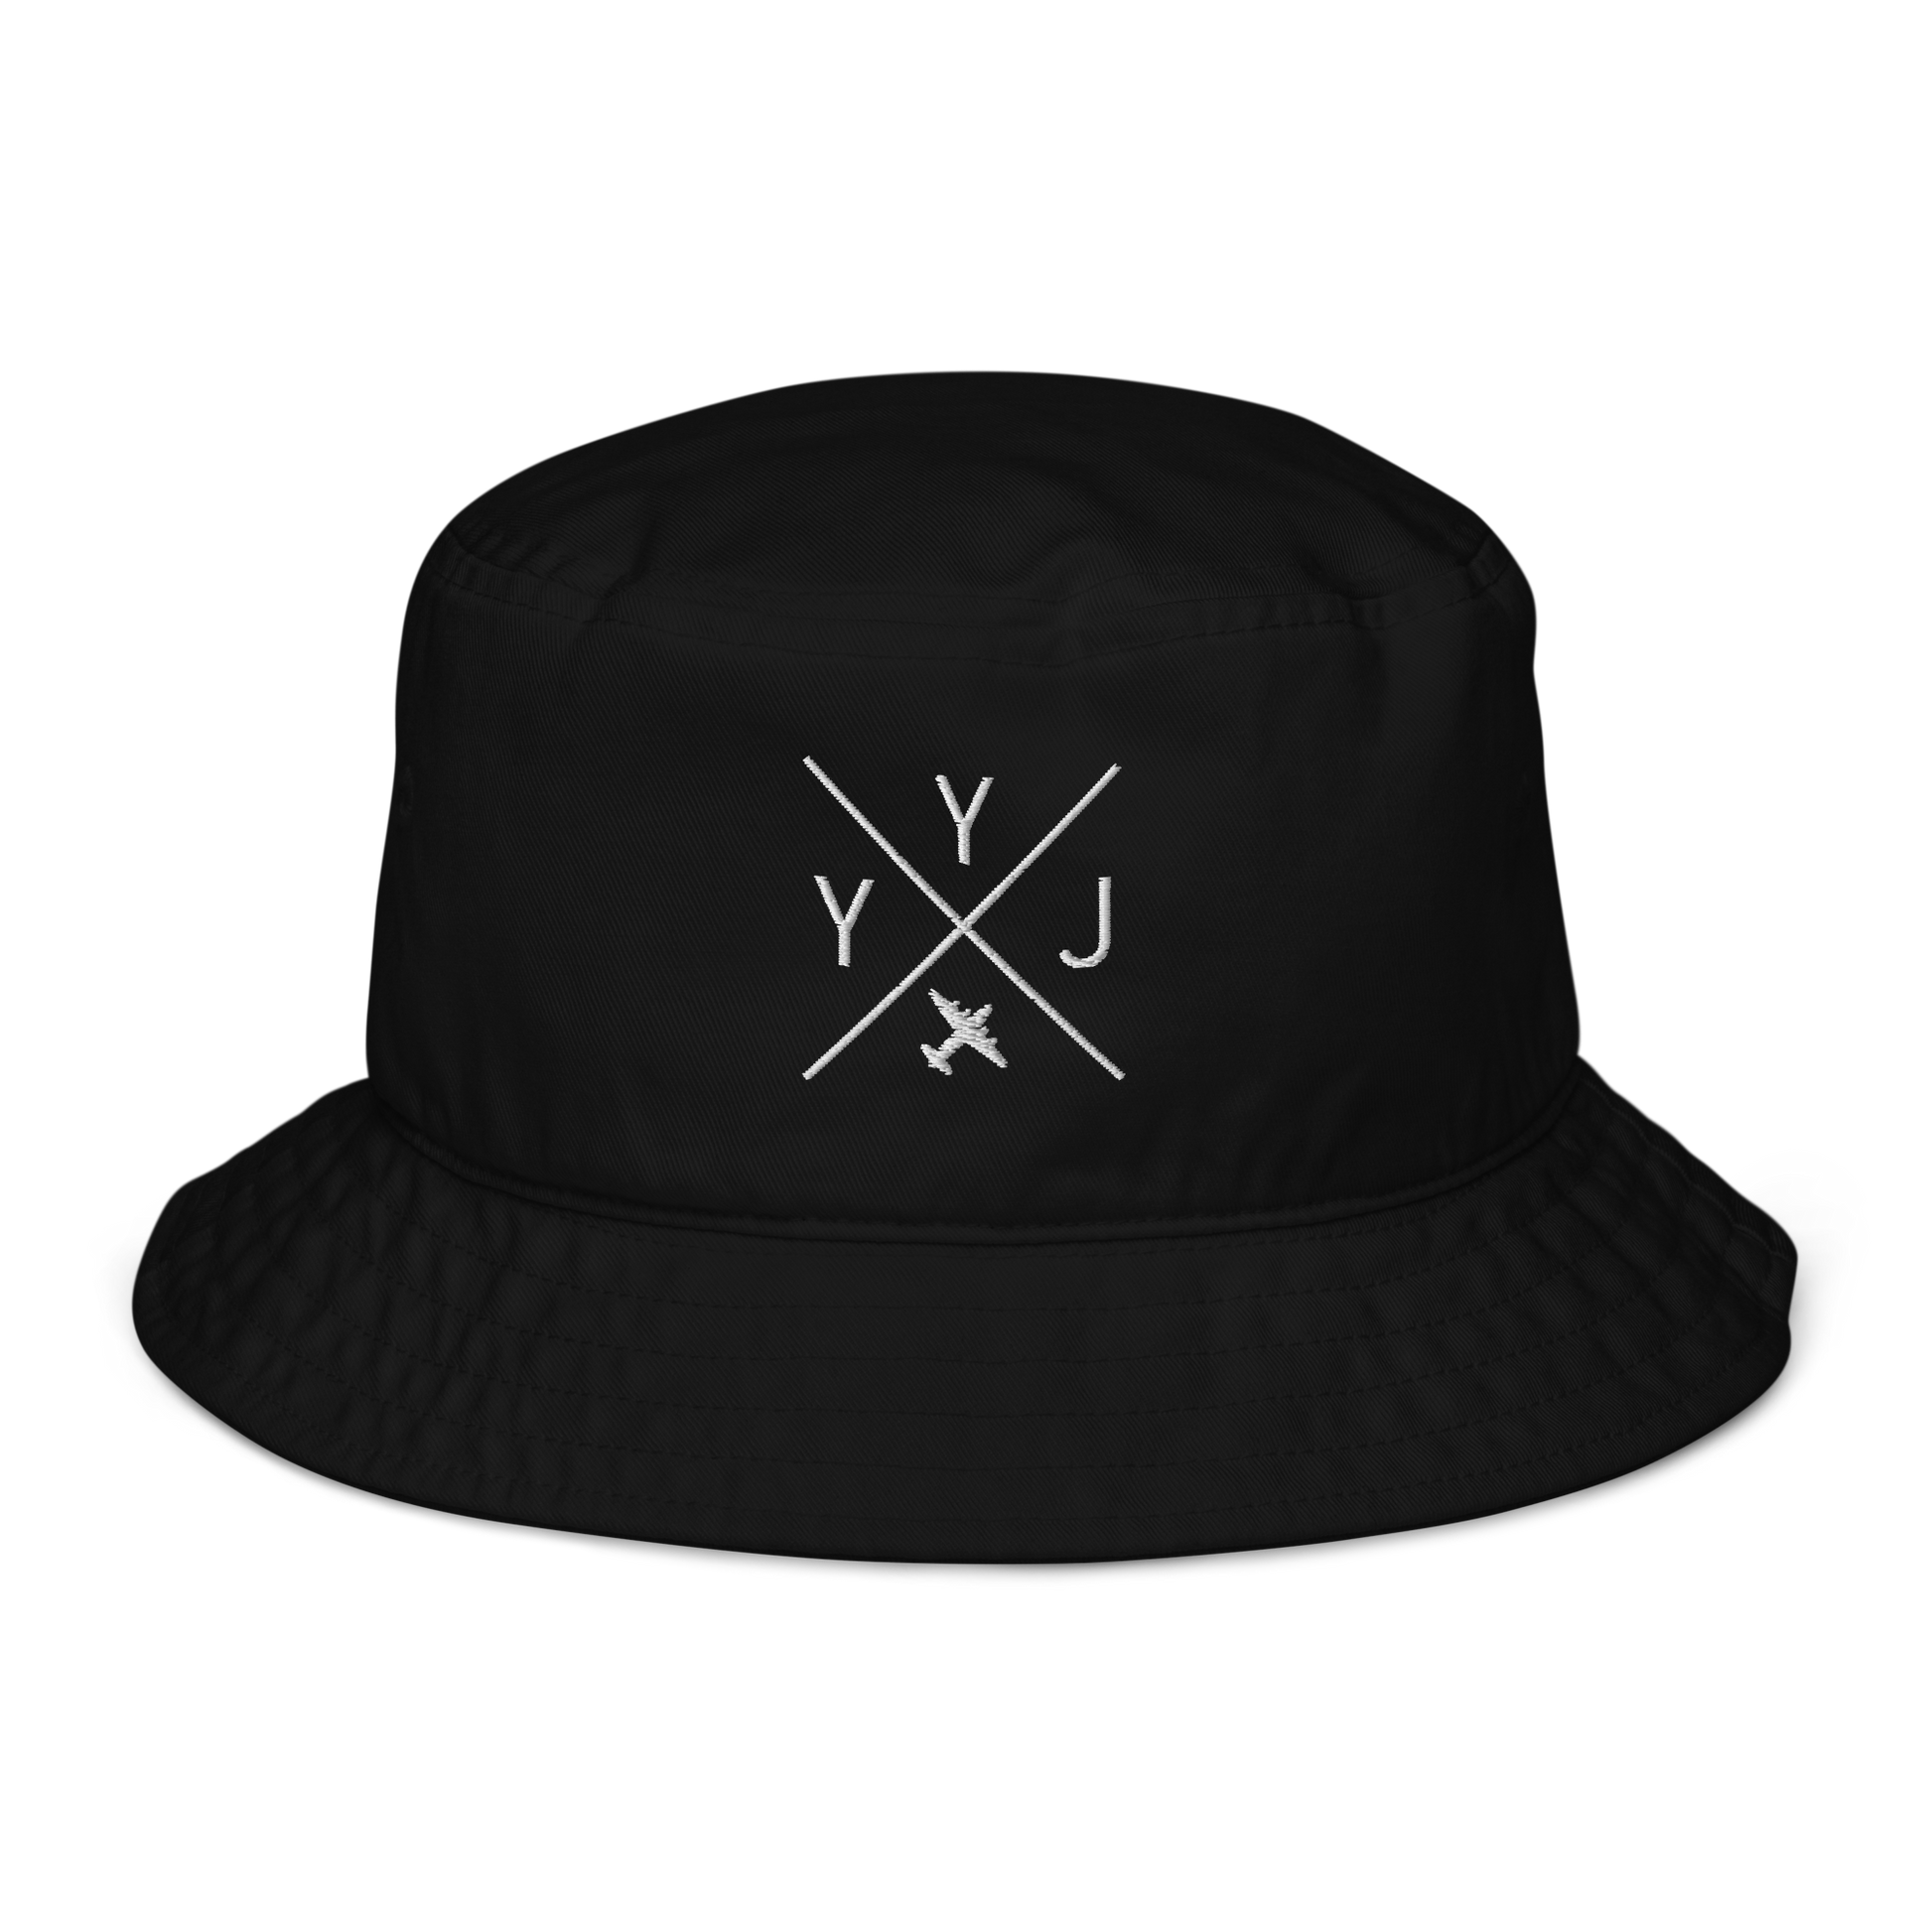 YHM Designs - YYJ Victoria Organic Cotton Bucket Hat - Crossed-X Design with Airport Code and Vintage Propliner - White Embroidery - Image 01